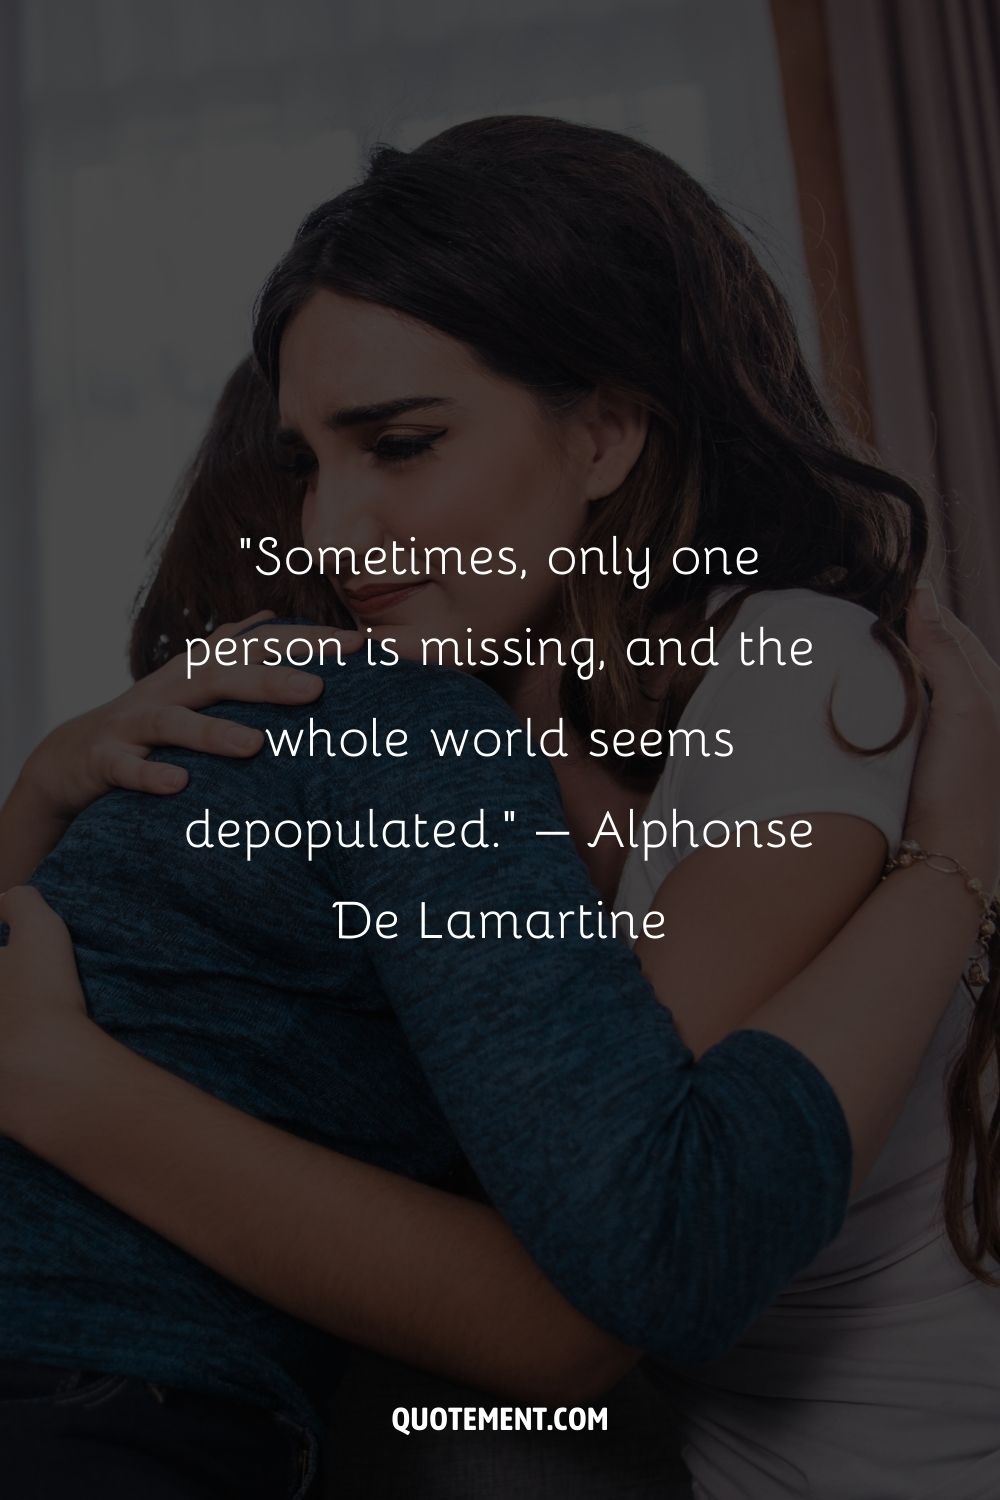 Sometimes, only one person is missing, and the whole world seems depopulated.